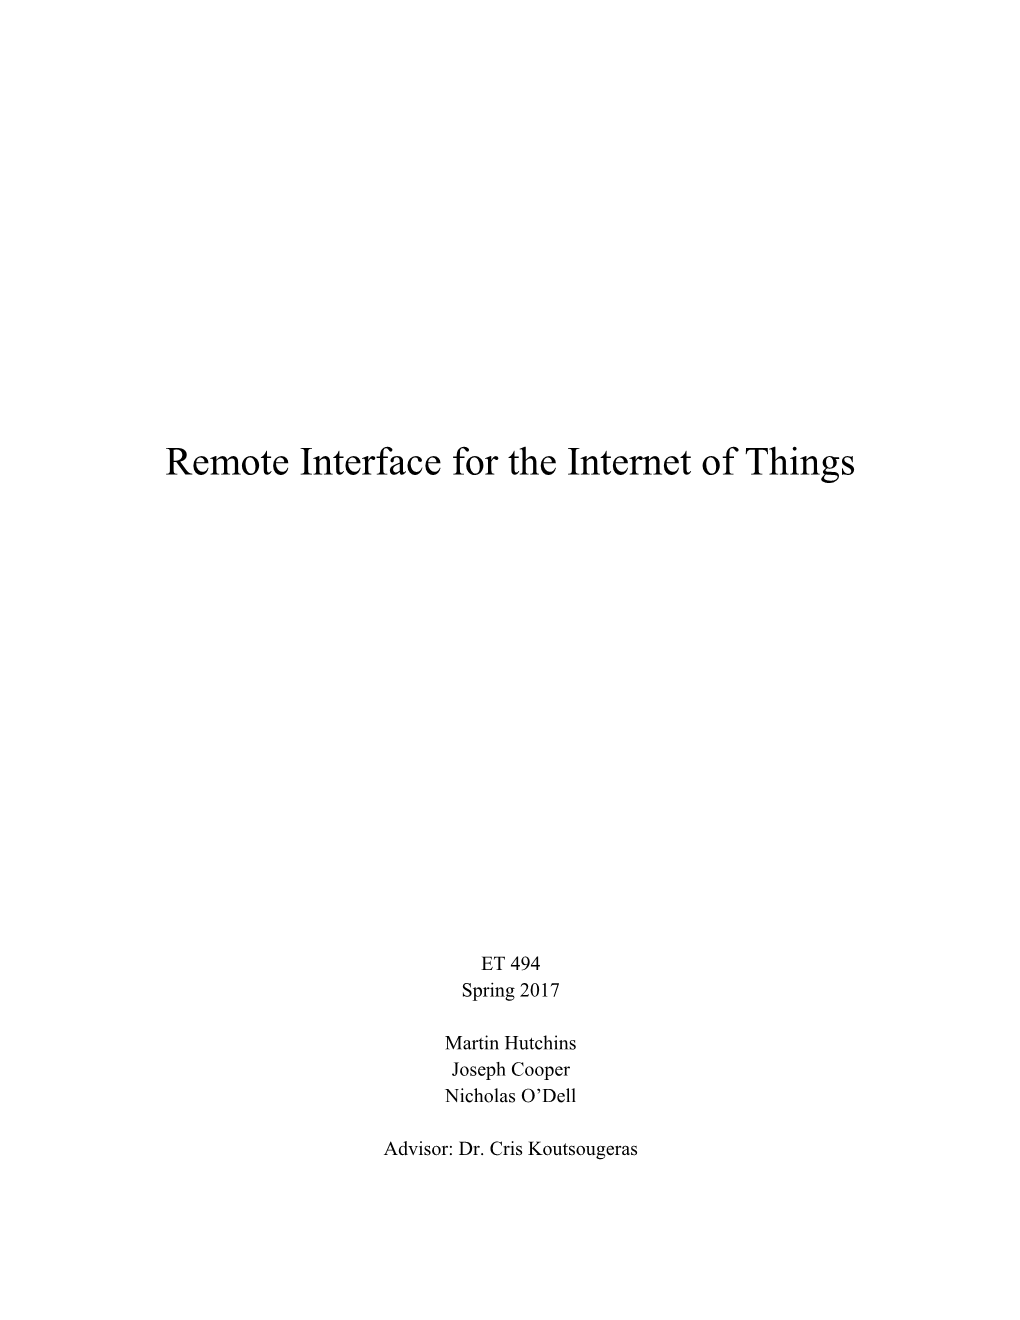 Remote Interface for the Internet of Things